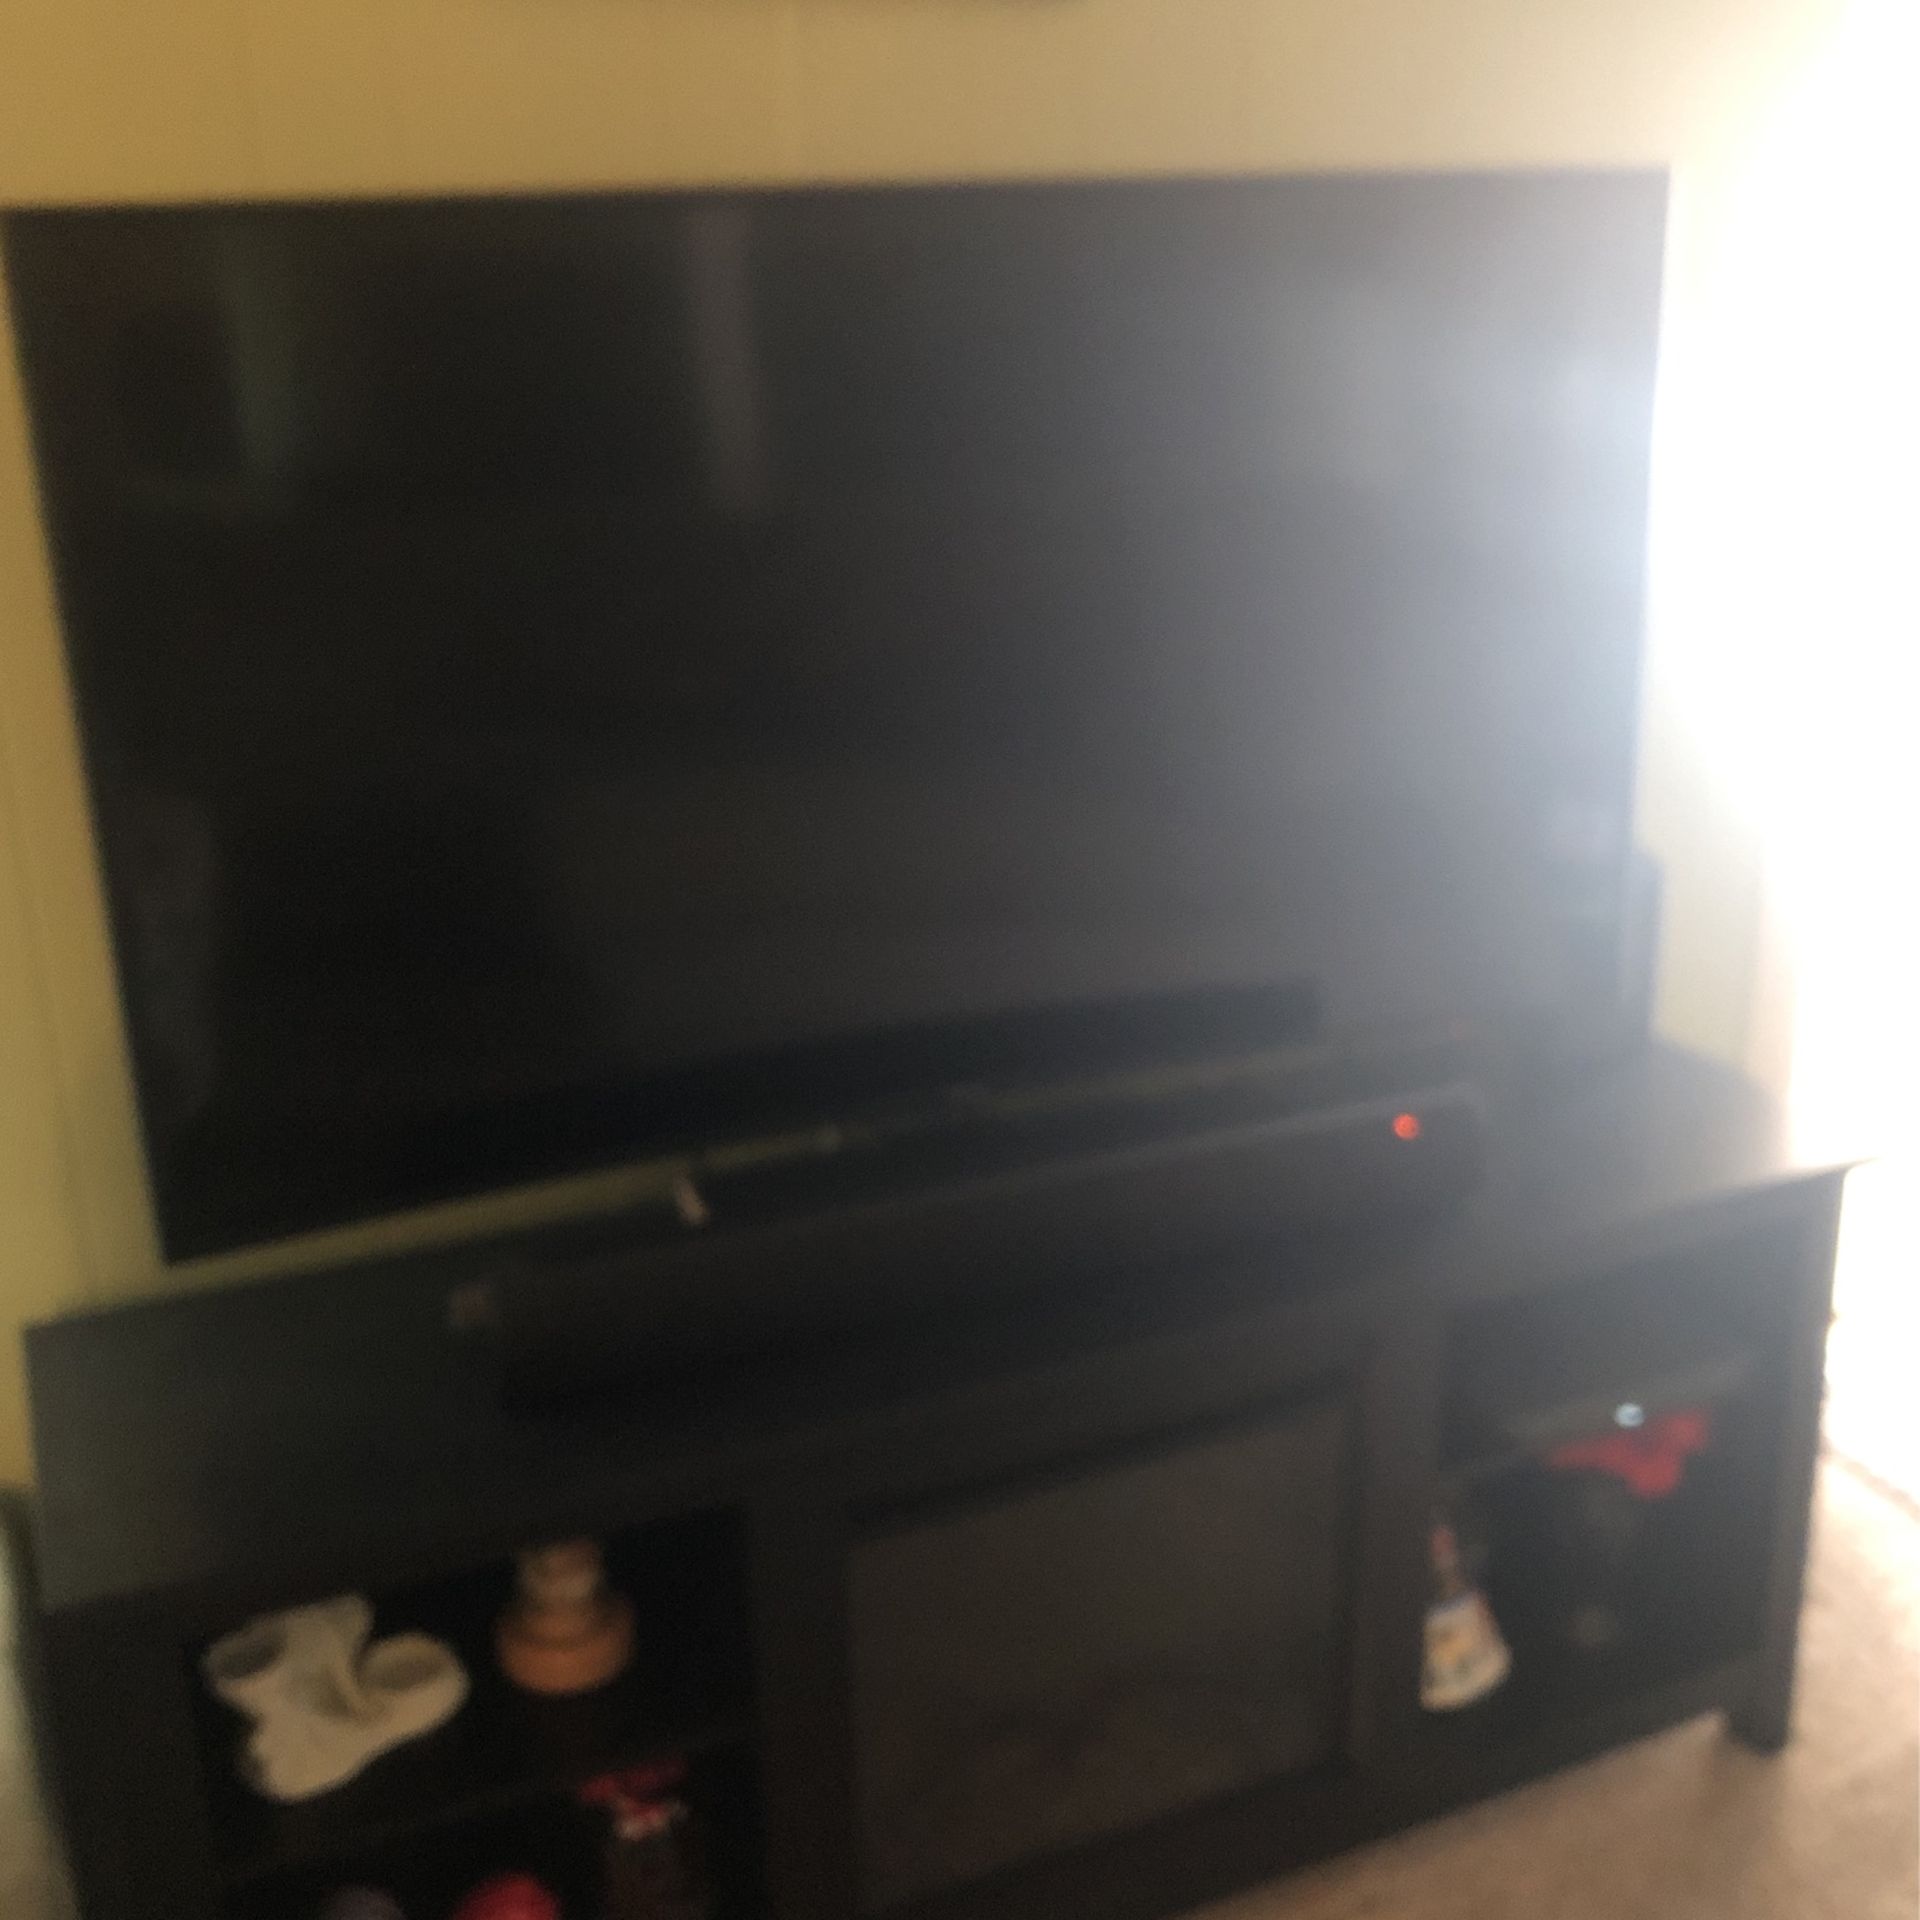 Tv Samson  55 Inch With Remote  Works Great  A Year And A Half Old  